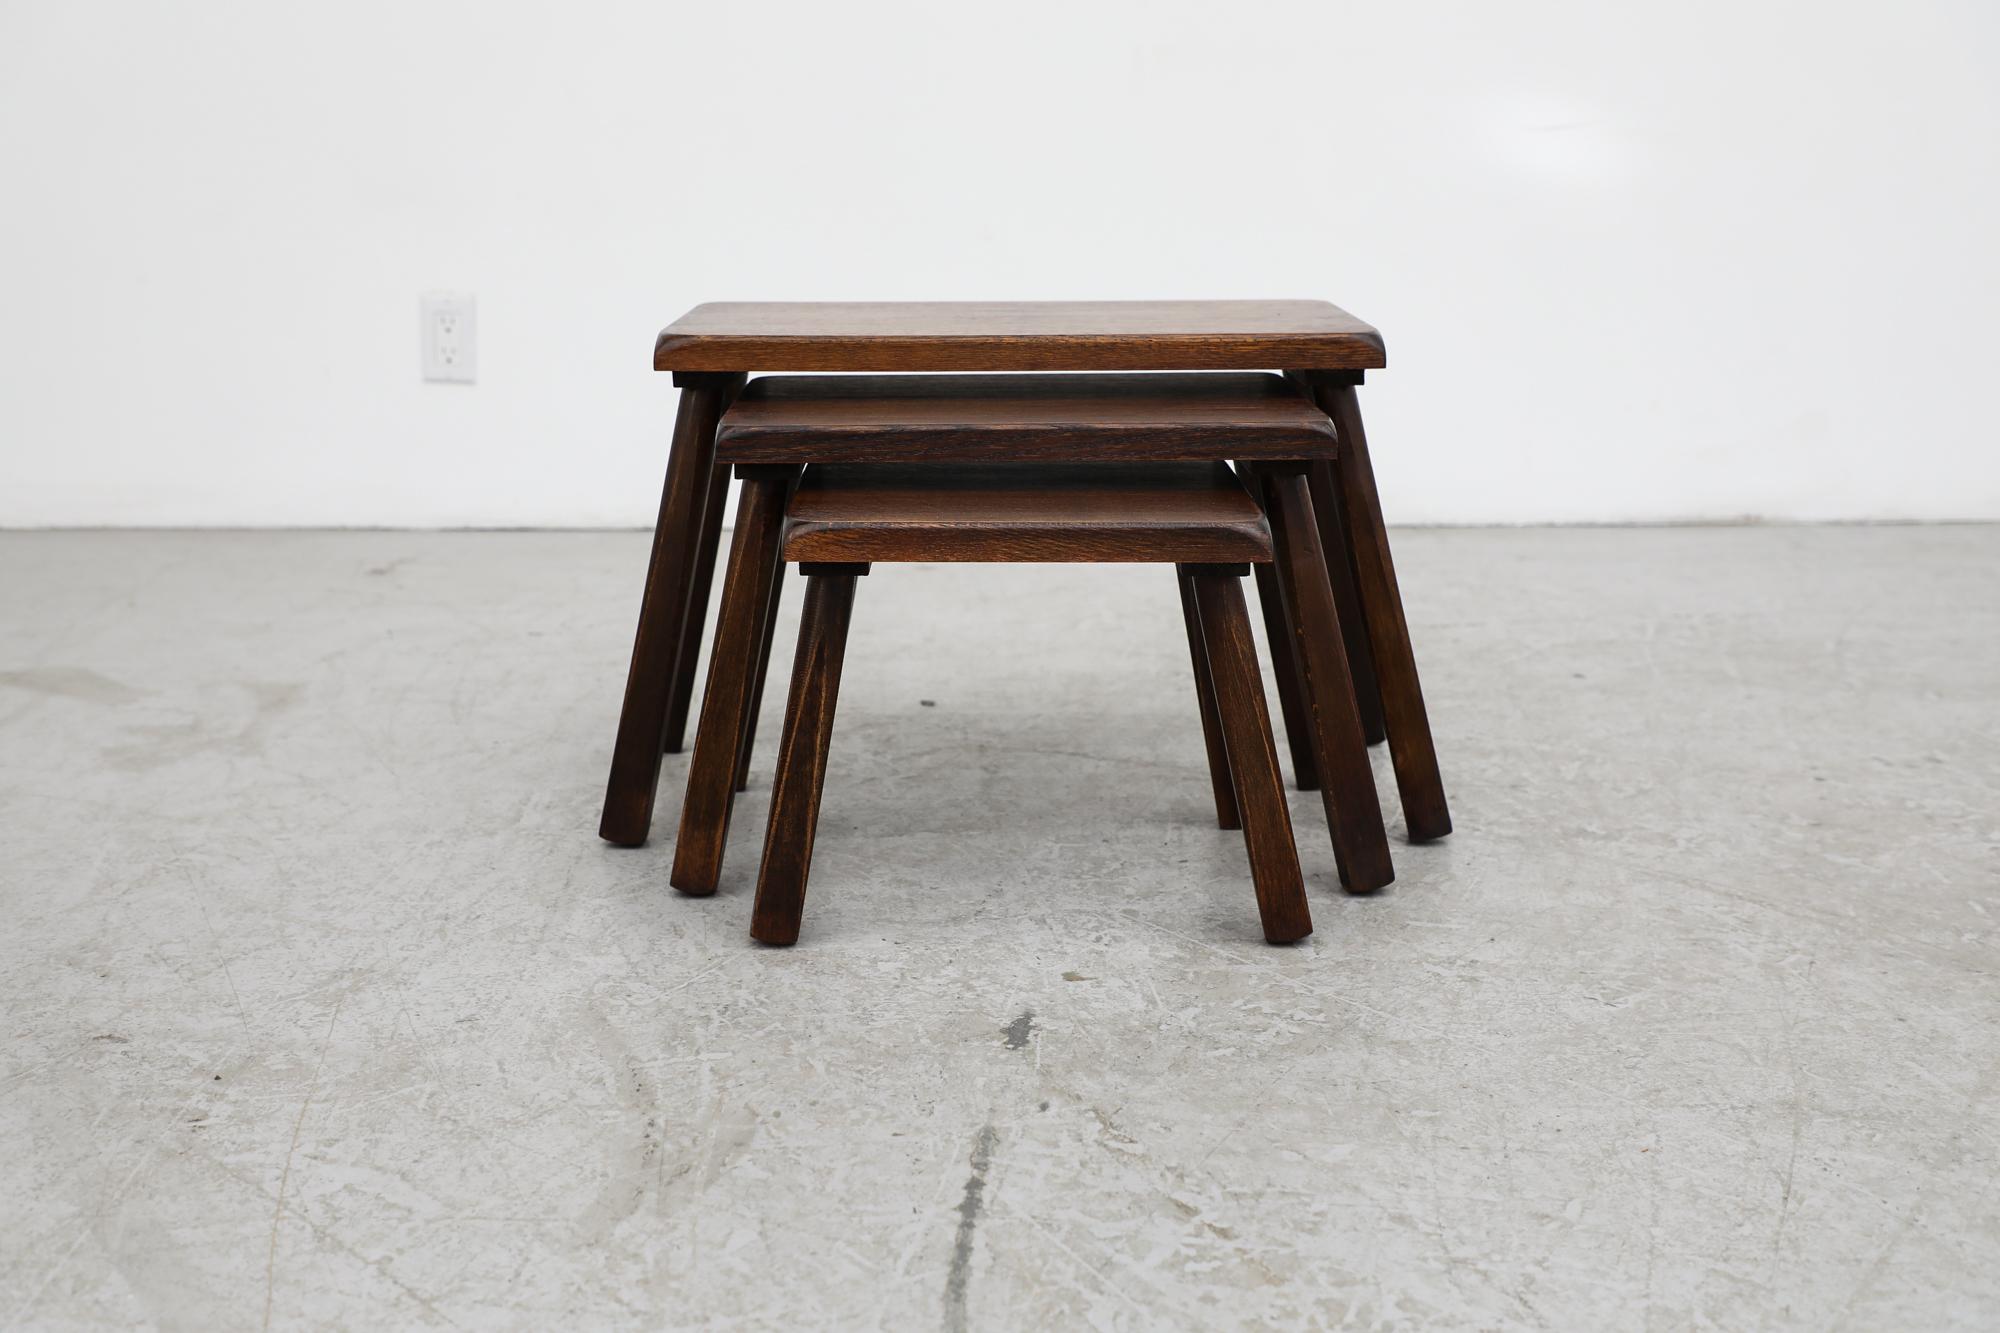 Set of 3 dark stained Brutalist nesting tables inspired by Pierre Chapo with round tapered legs. All lightly refinished and in otherwise original condition. The middle table measures 20.25 x 12.5 x 13.5 and the smallest table measures 15.25 x 12.5 x